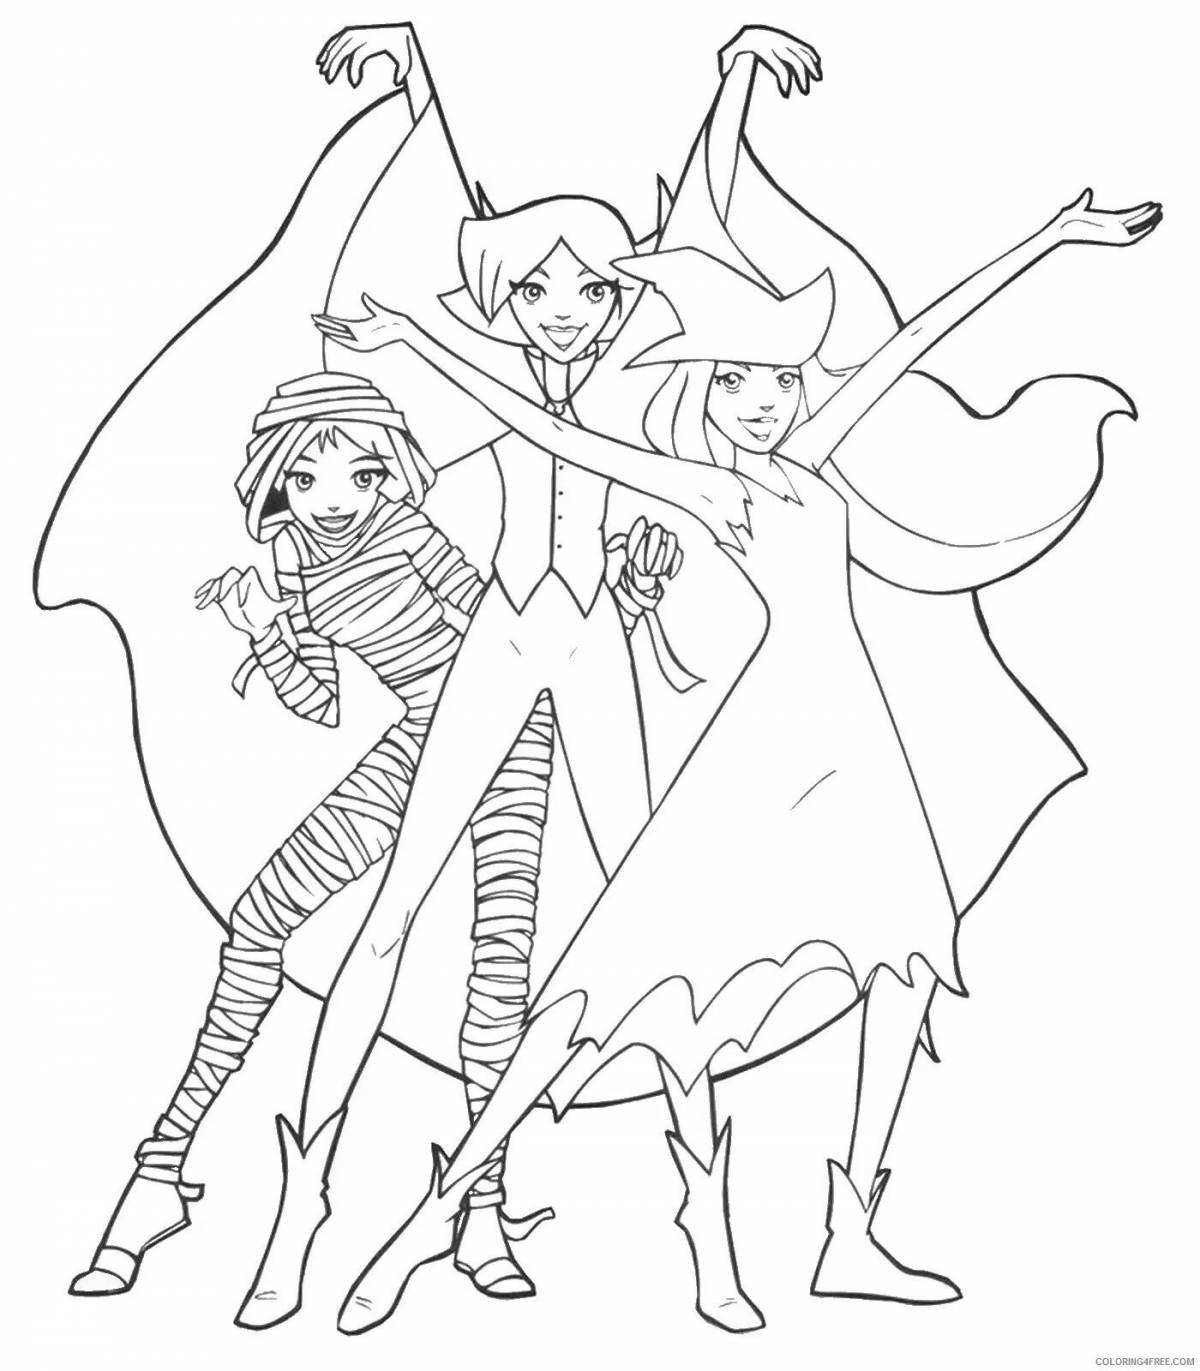 Colorful spy kids coloring page